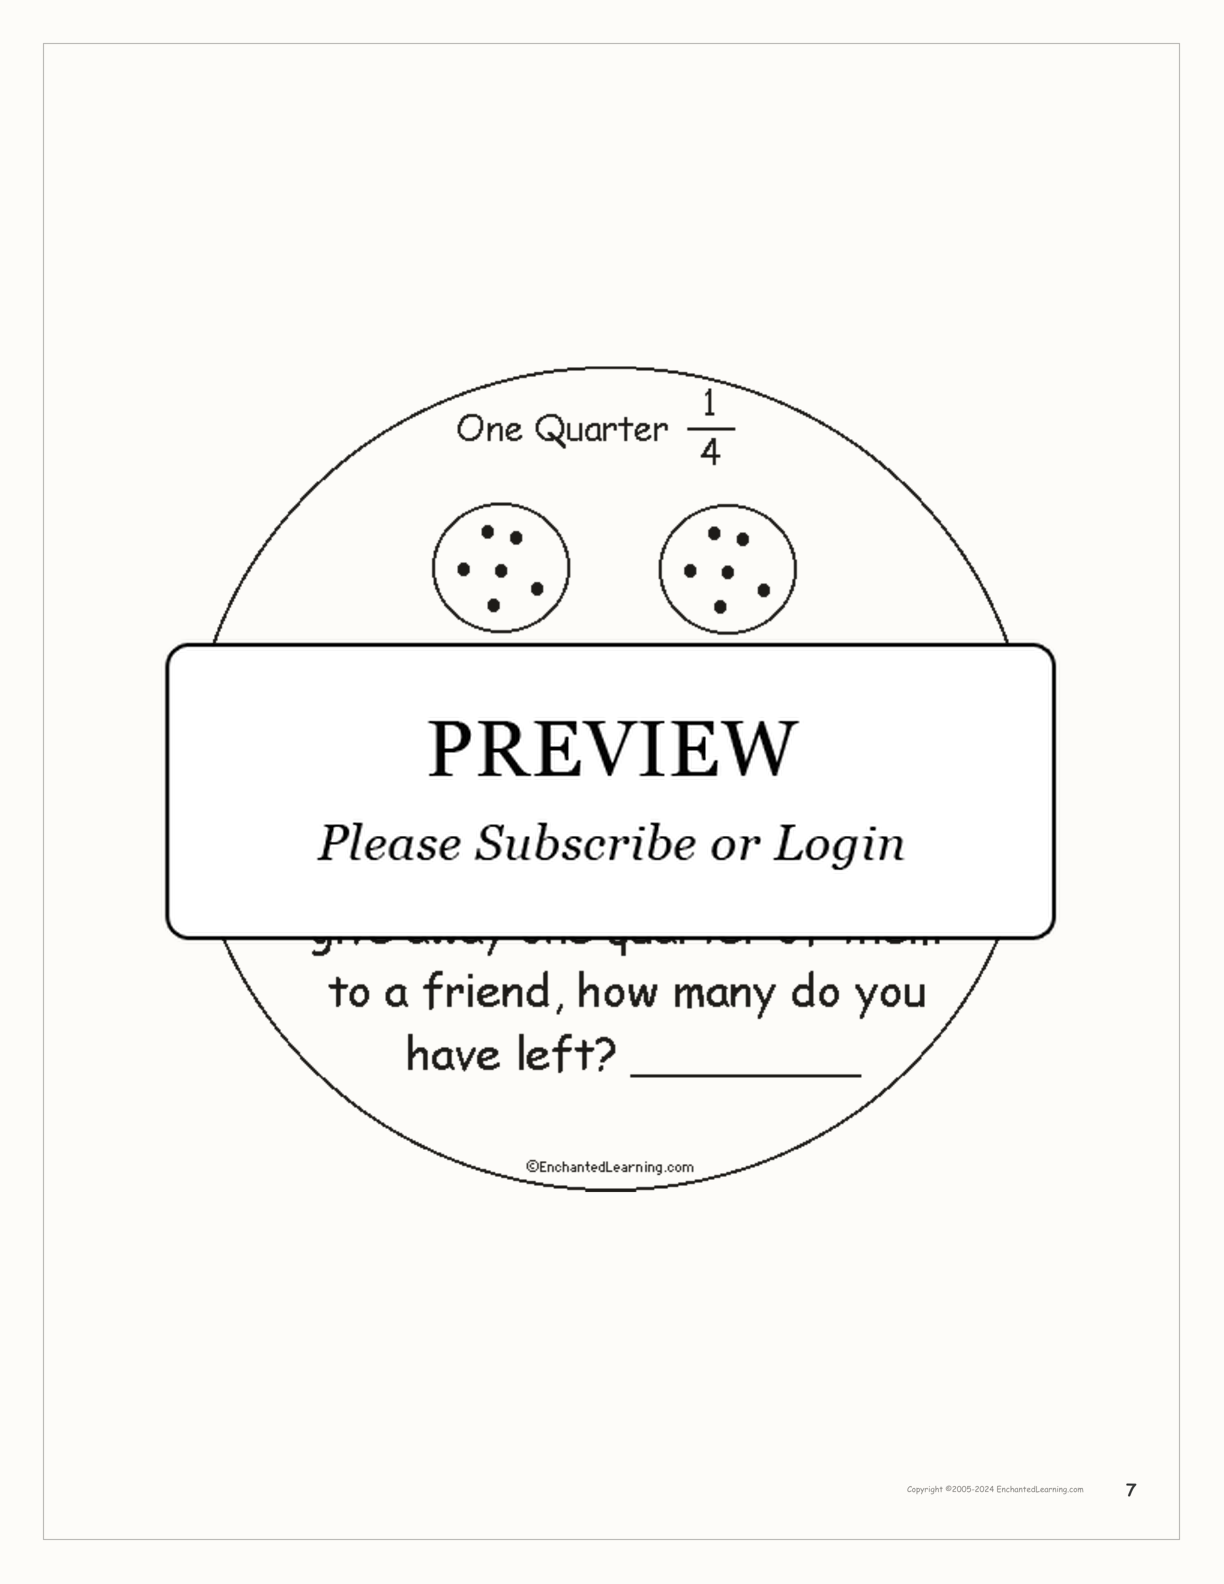 One Quarter: A Book on Fractions interactive printout page 7